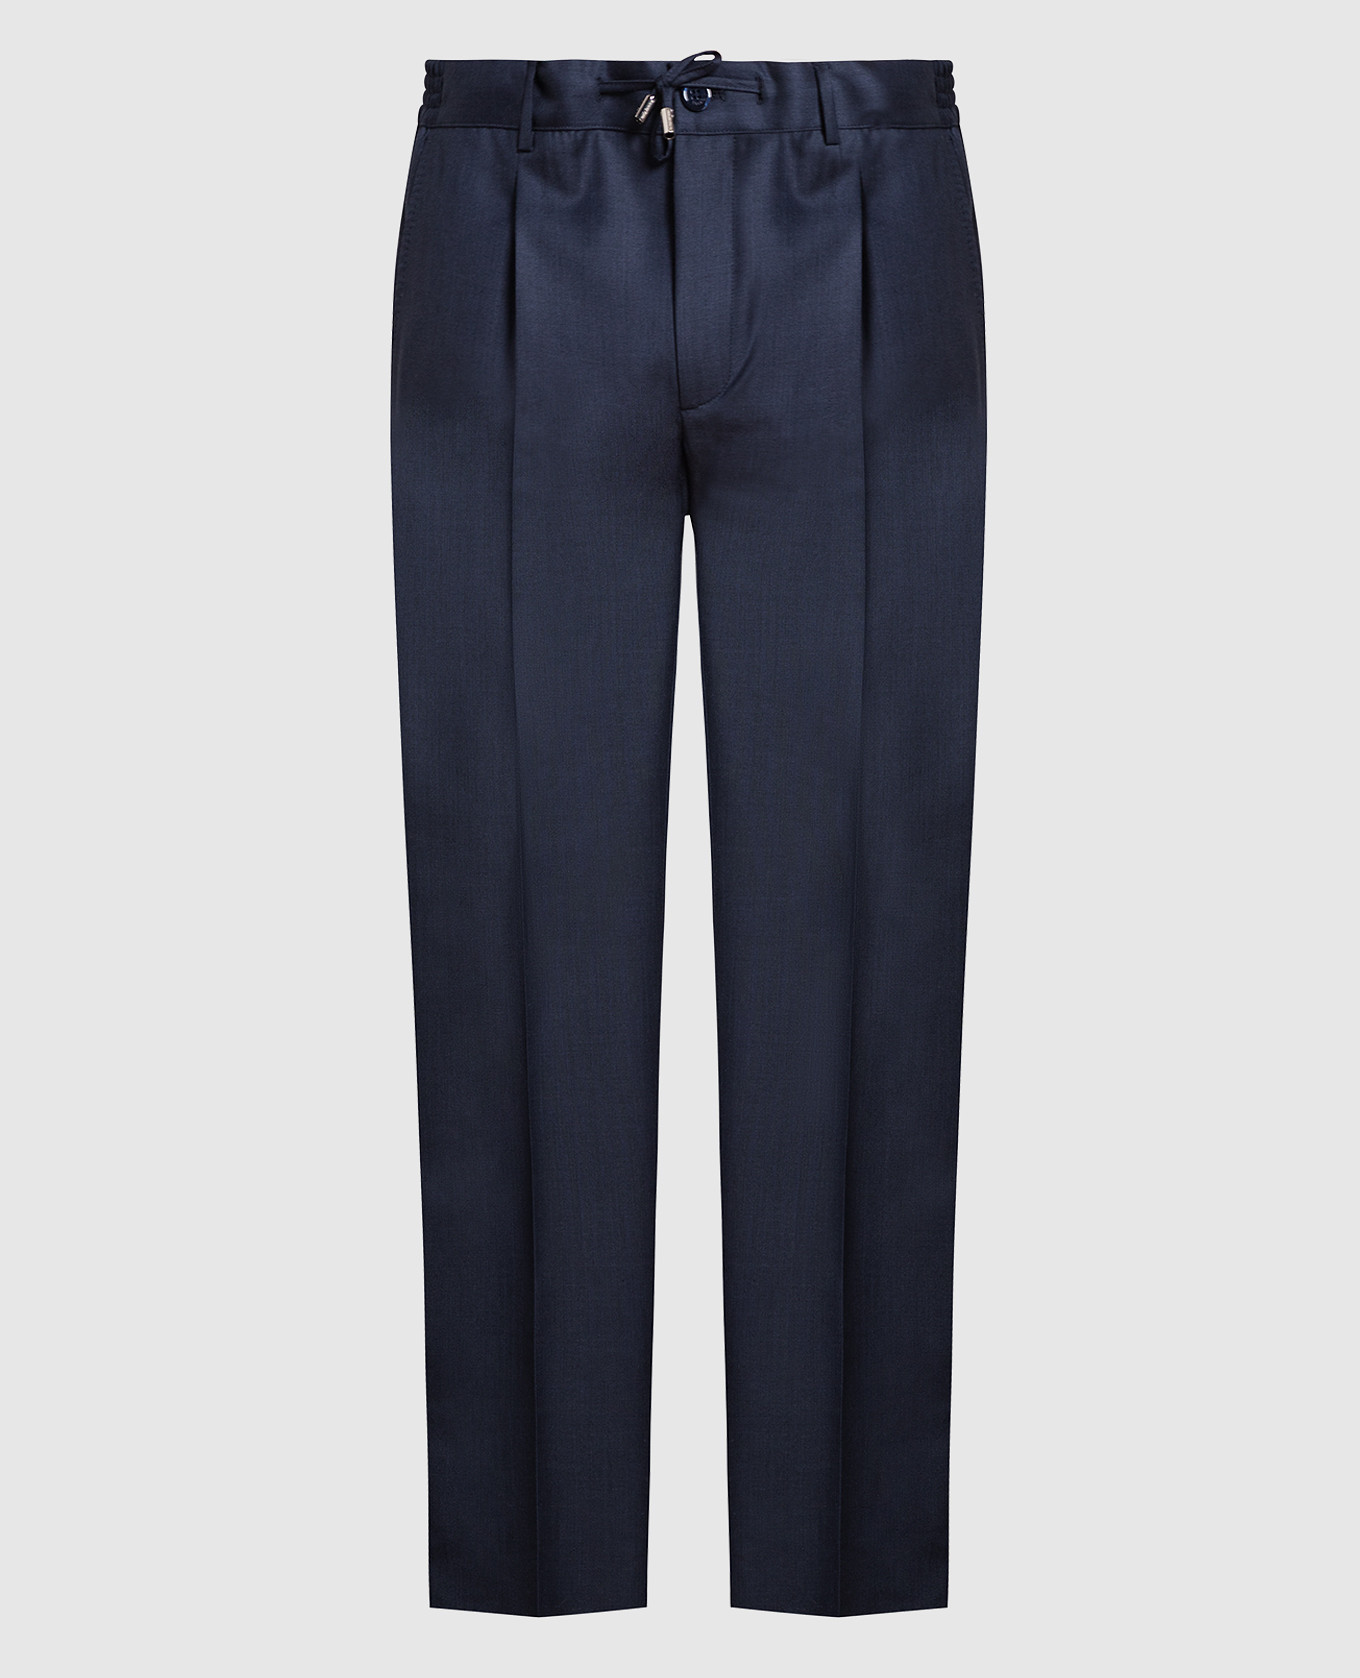 Blue trousers made of wool, cashmere and silk